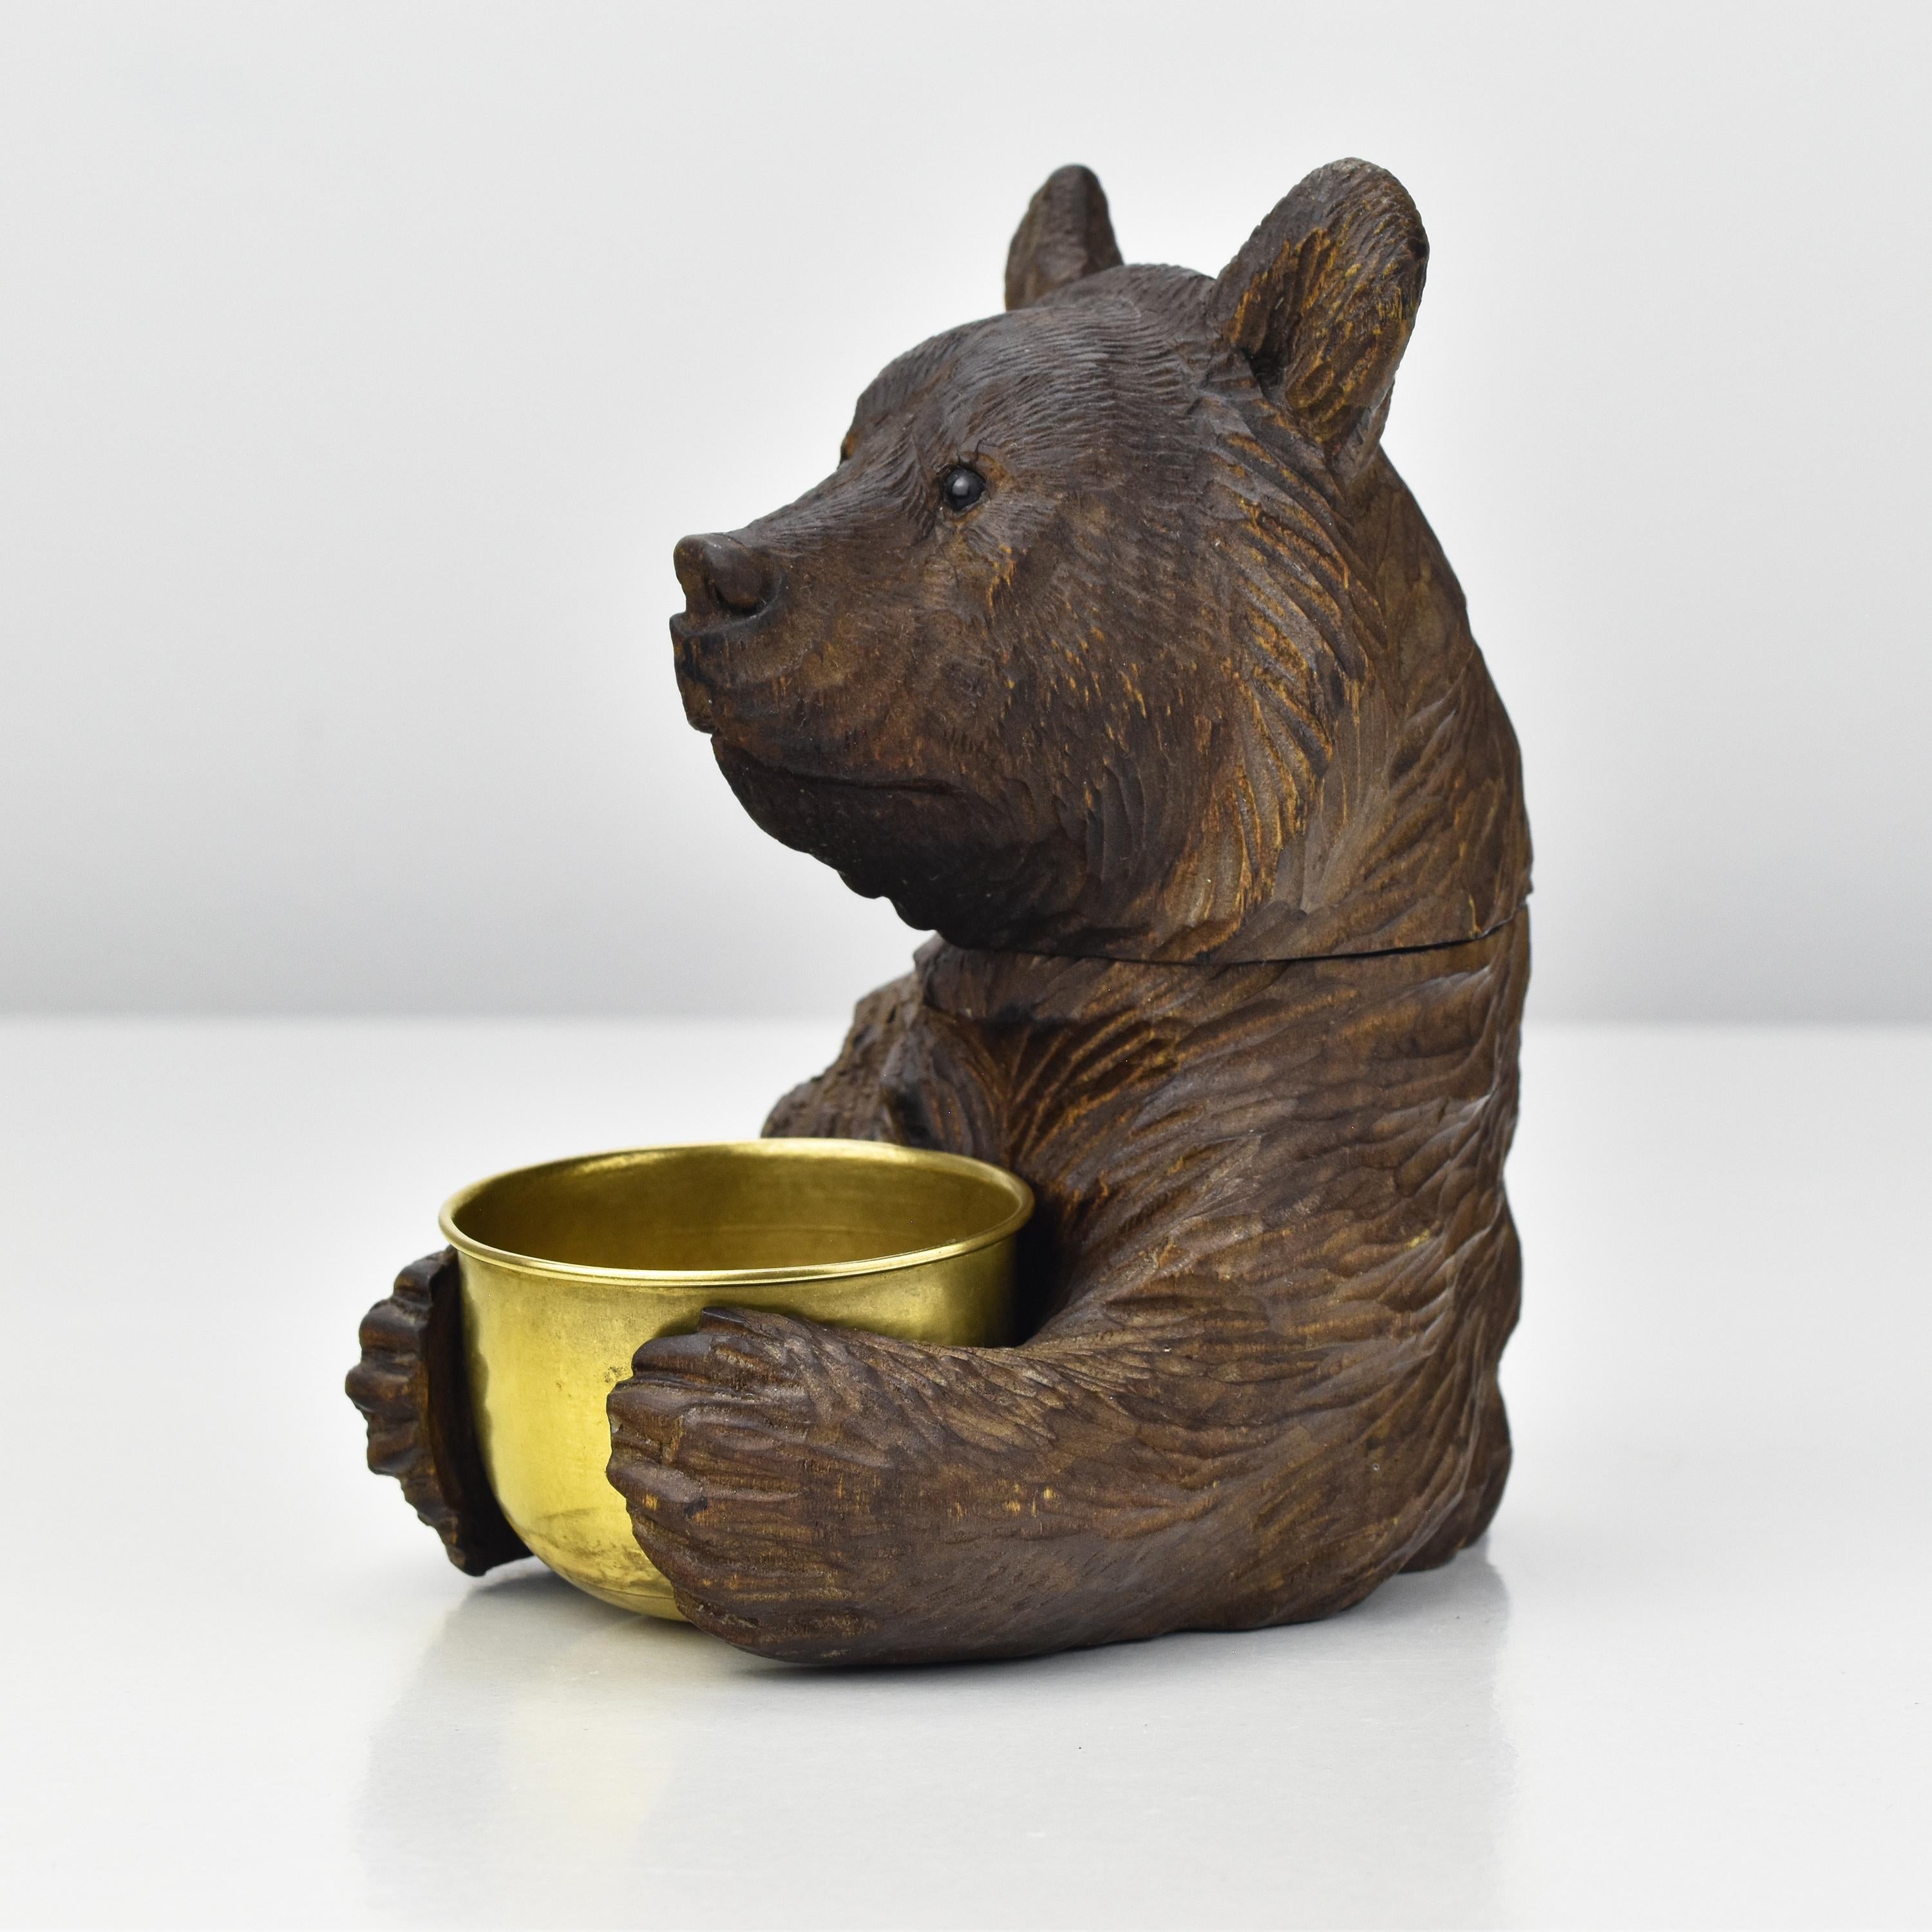 Ths antique German or Swiss bear figurine is a really lovely item and a remarkable piece of craftsmanship regarding its fine carving, dating back to approximately 1880. 

Carved from linden wood with a dark patina, it exudes a sense of old-world